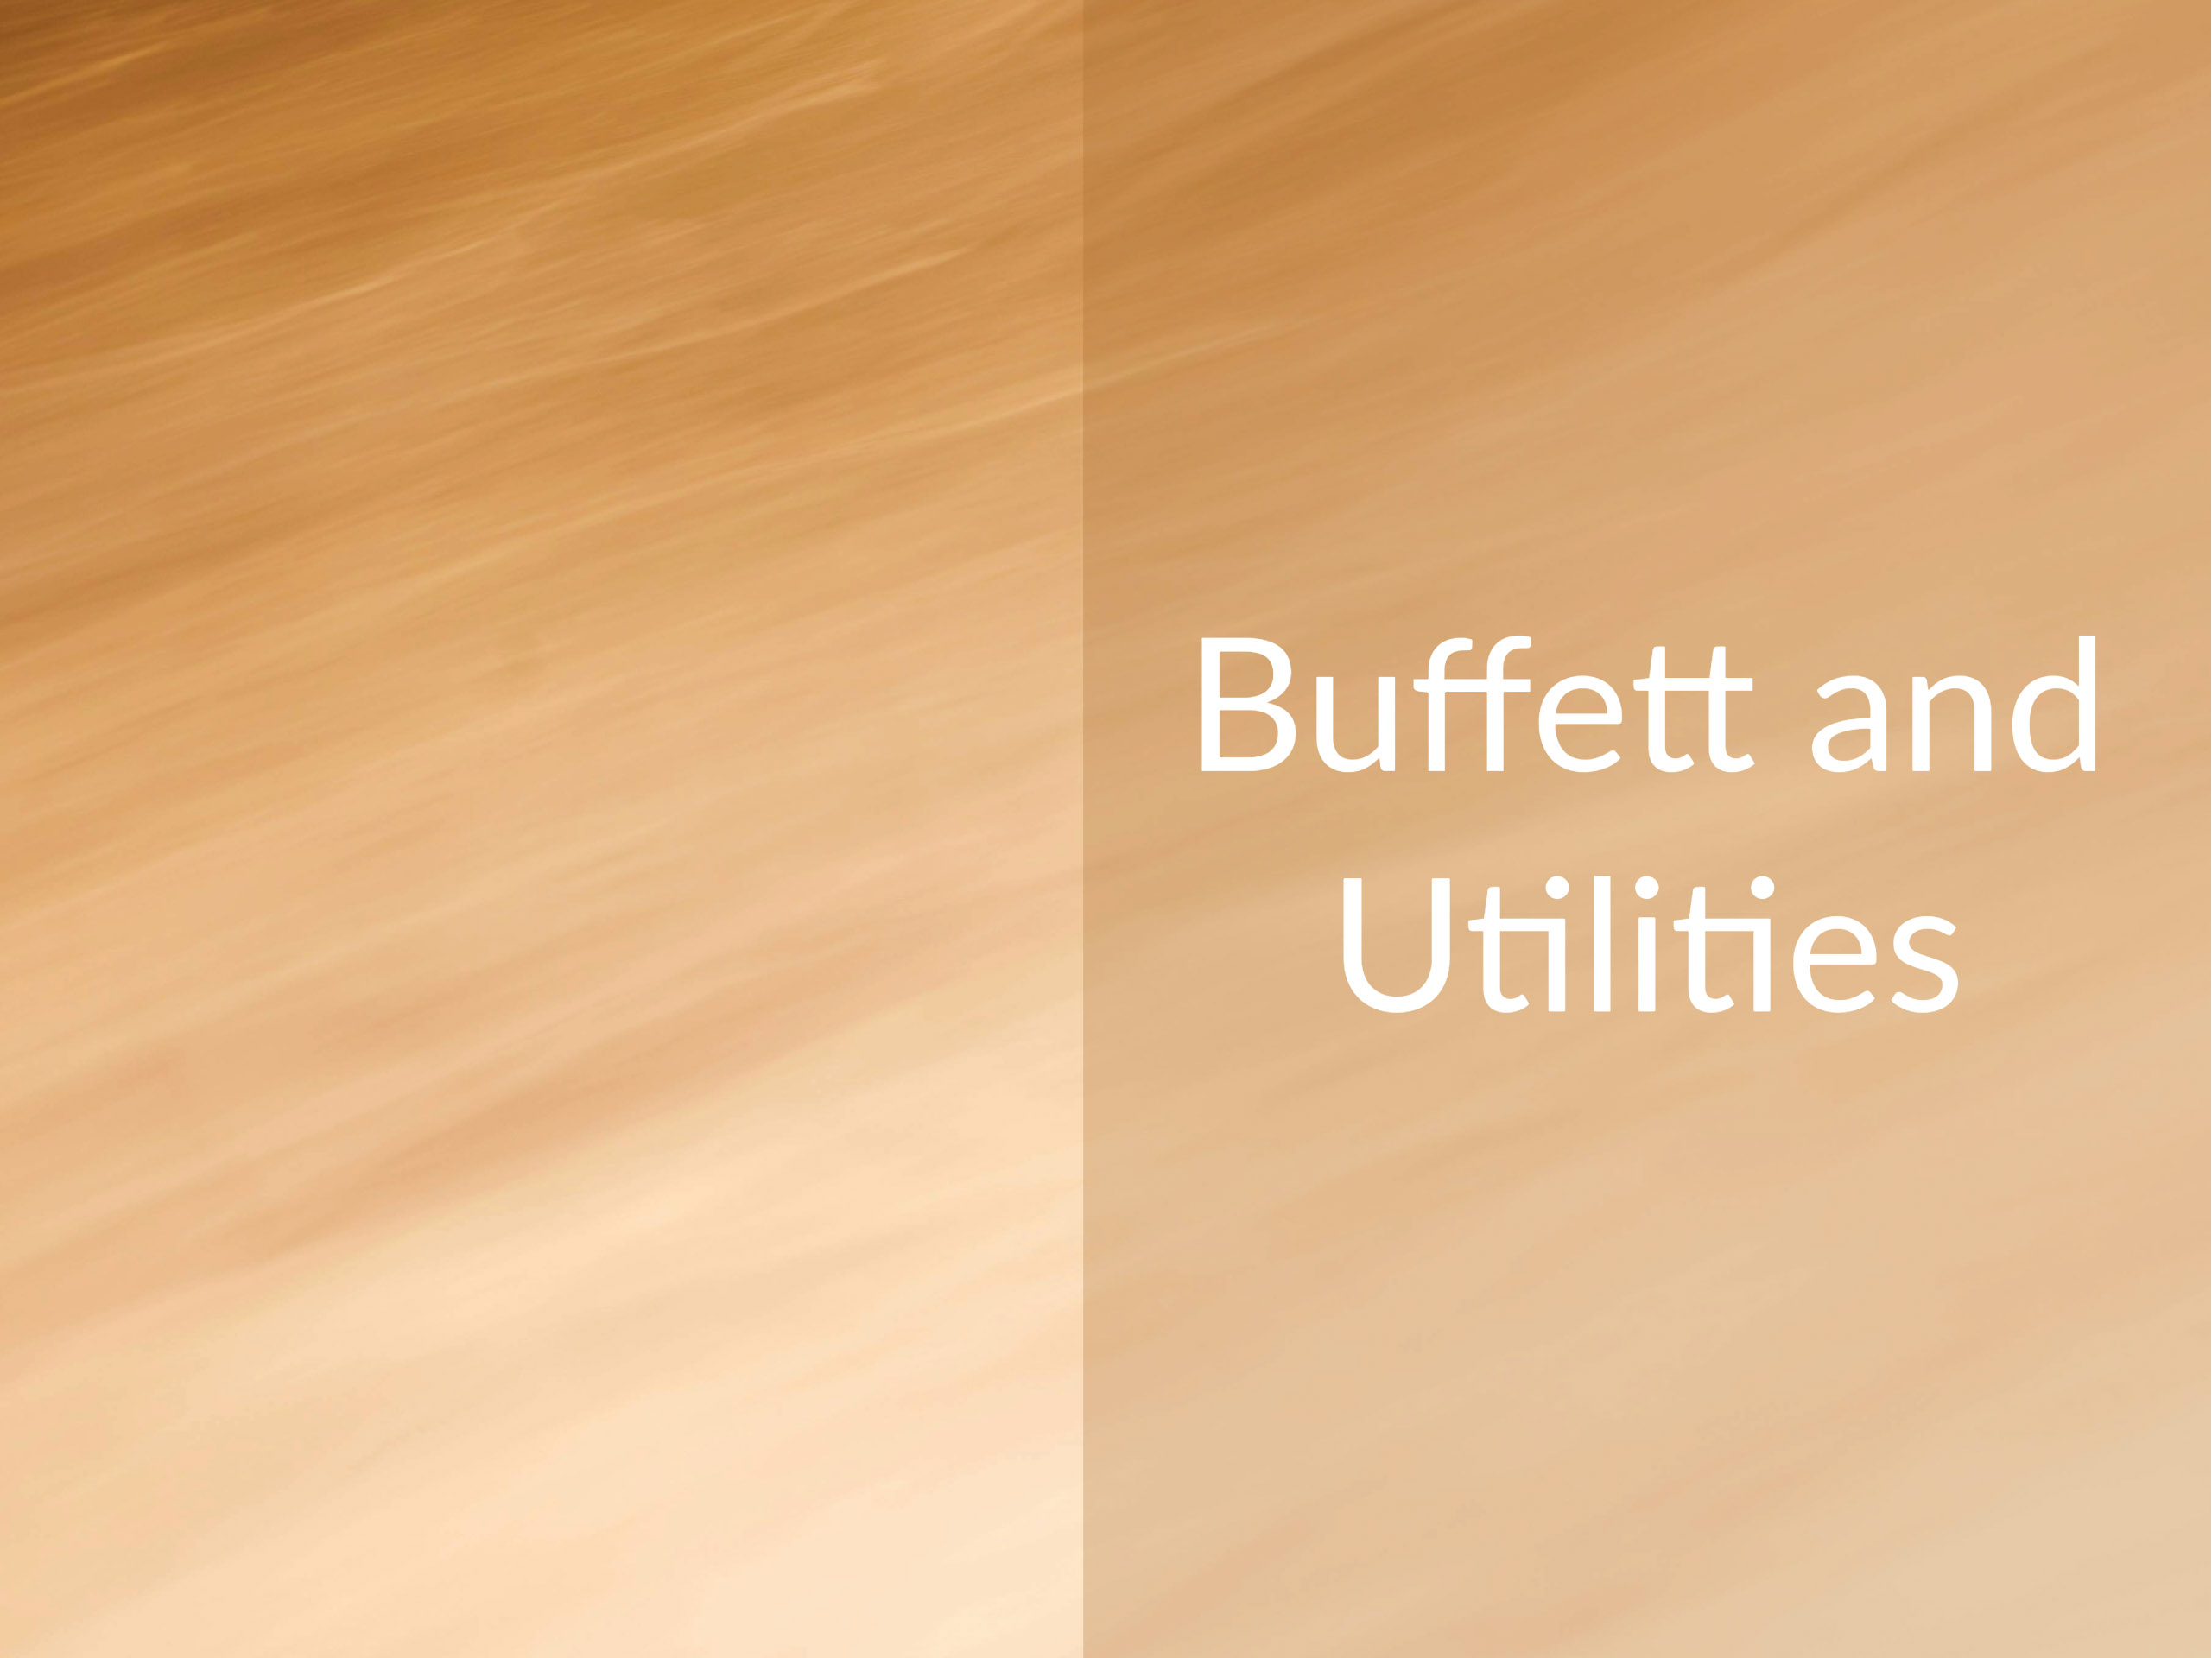 Abstract background with the caption "Buffet and Utilities"